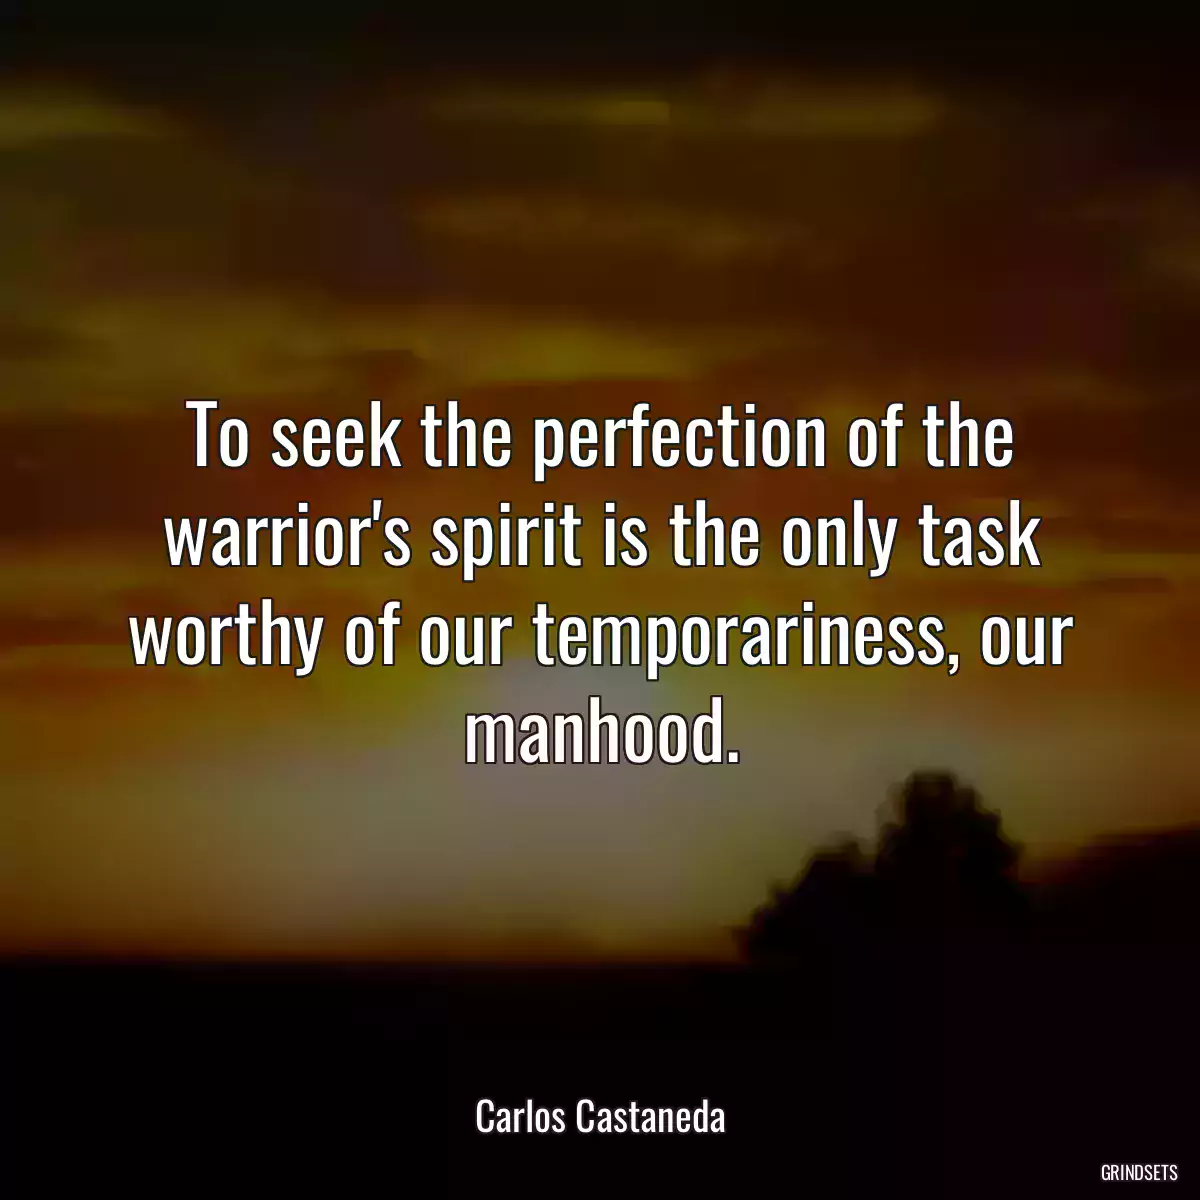 To seek the perfection of the warrior\'s spirit is the only task worthy of our temporariness, our manhood.